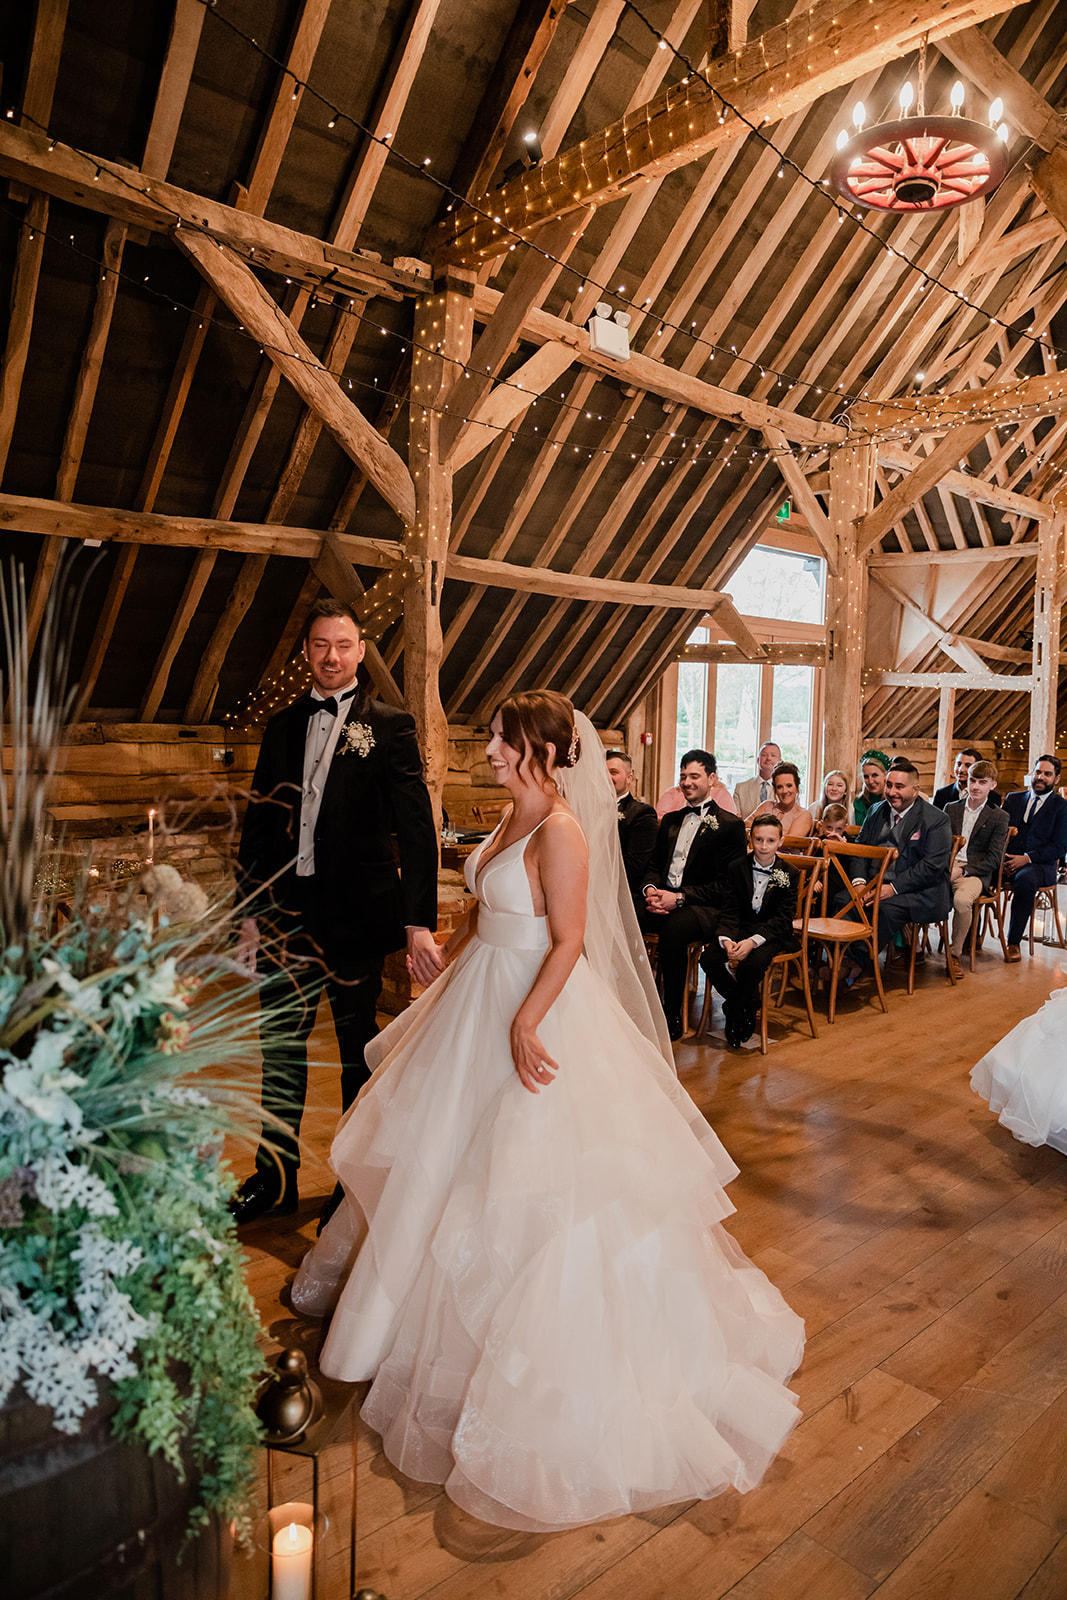 Bride and groom - wedding ceremony at Silchester Farm in Hampshire